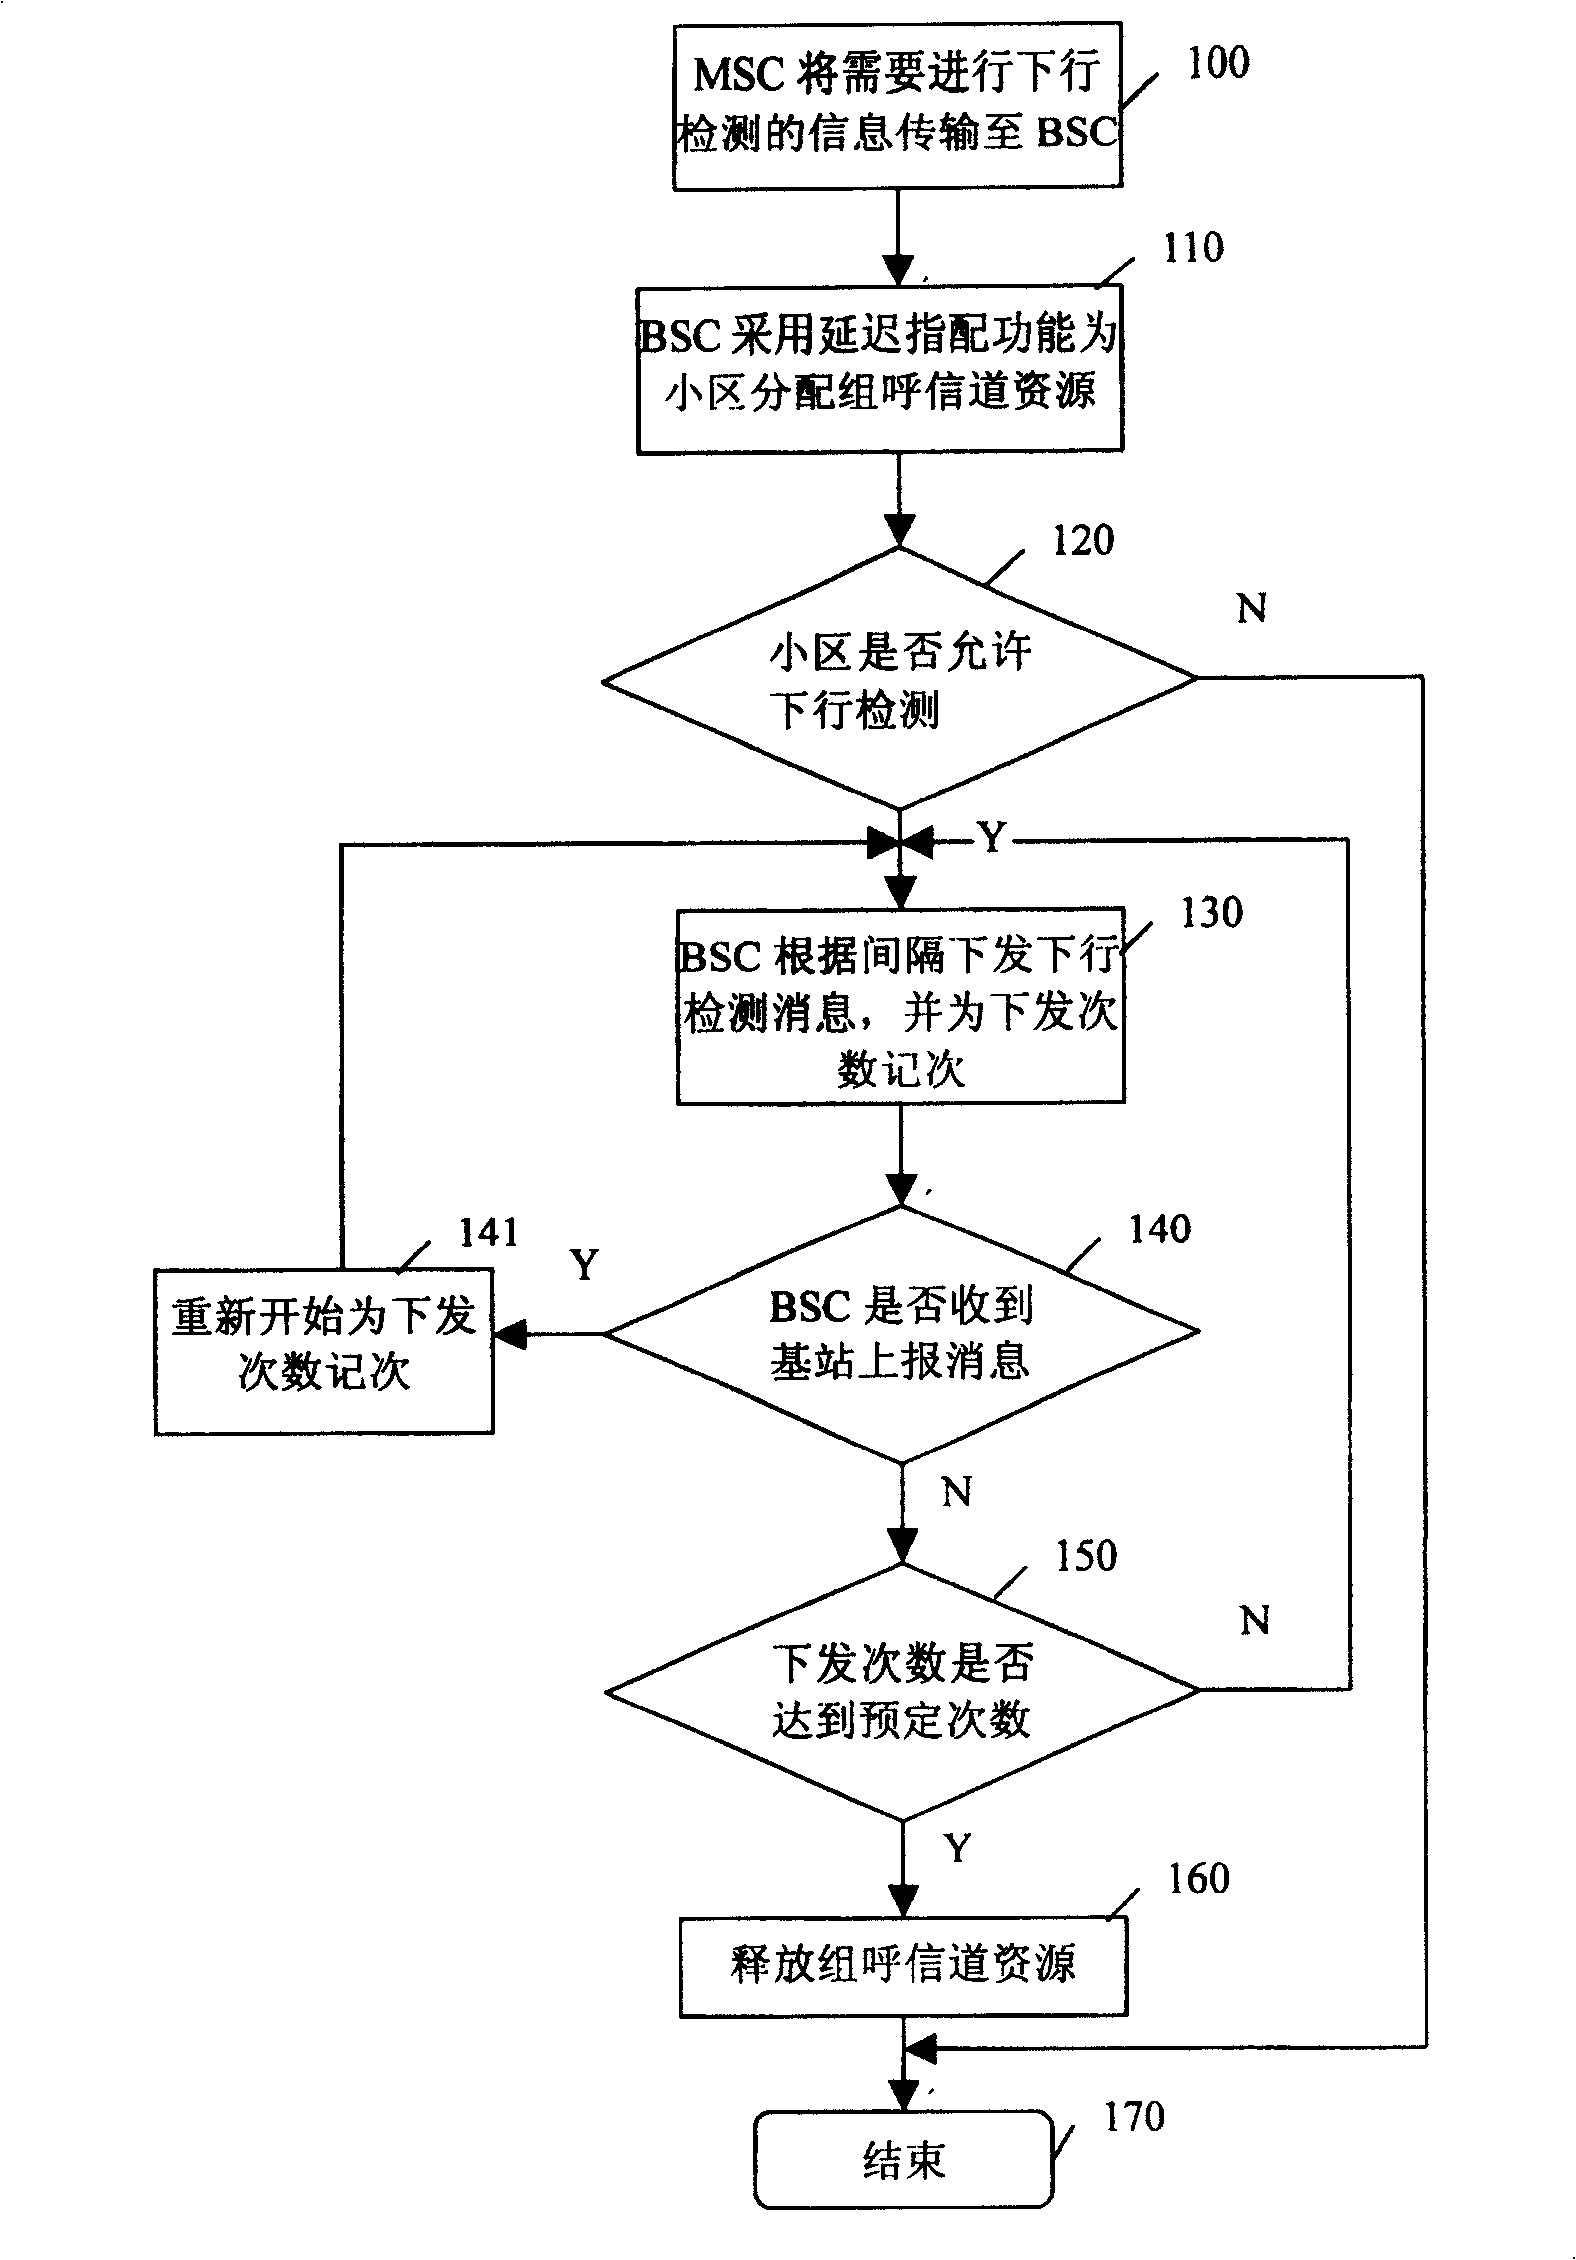 Group call channel resource managing method in mobile communication system